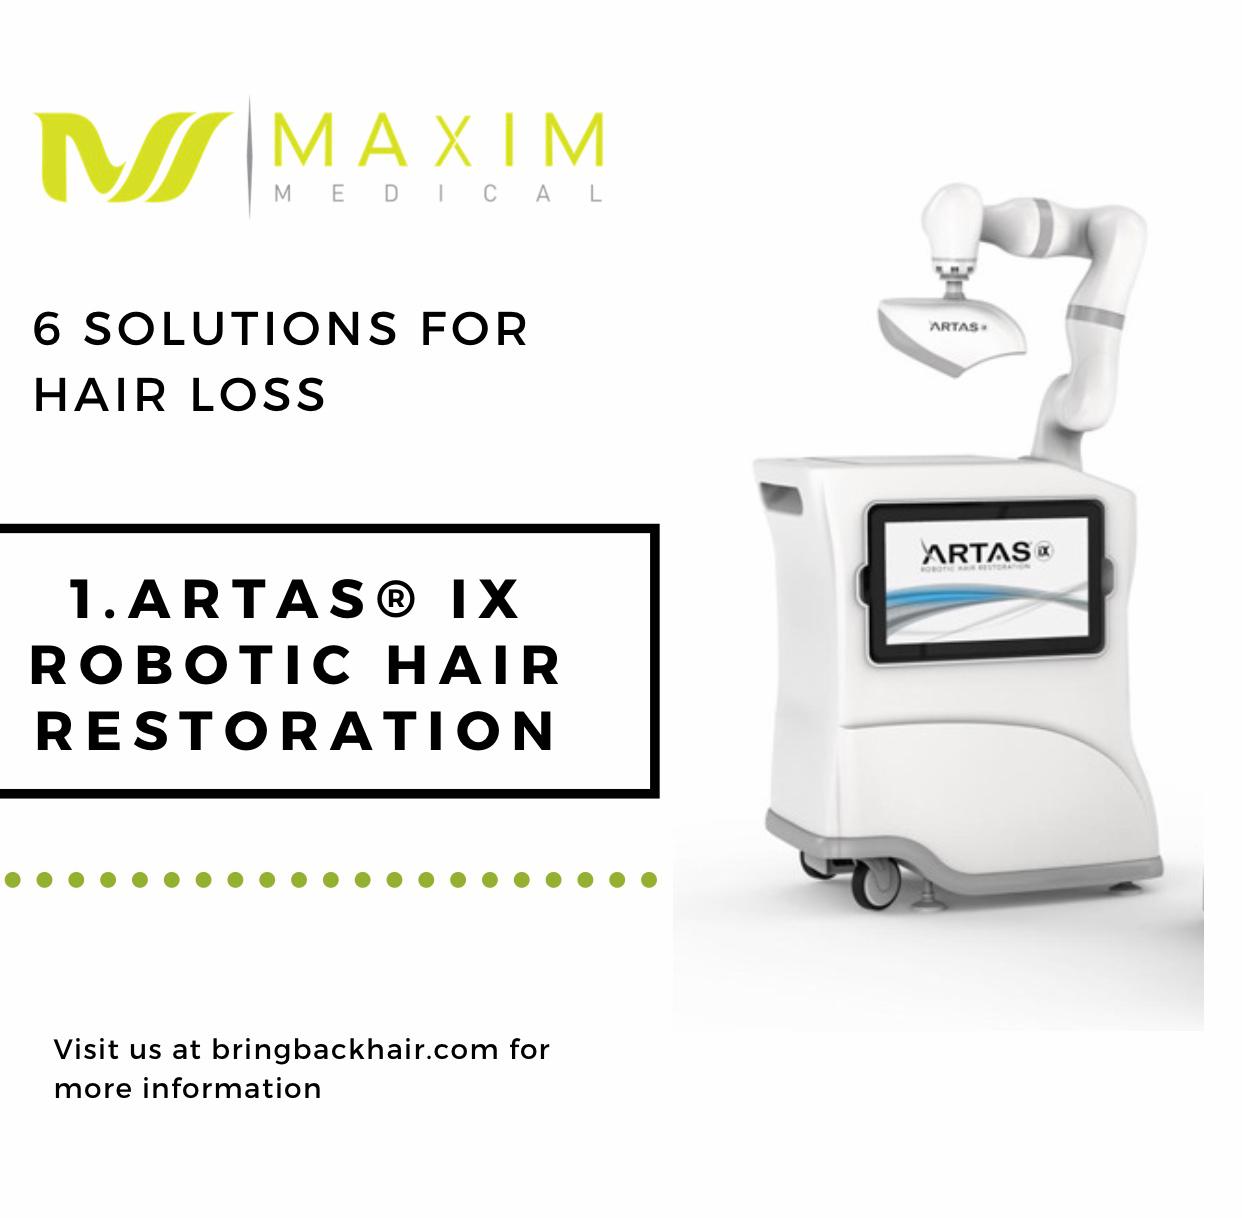 6 Solutions For Hair Loss

1. Artas iX Robotic Hair Restoration
While there are medications designed to treat hair loss, many people are opting for a more permanent solution to the problem. According to the International Society of Hair Restoration Surgery, nearly 90,000 hair transplant operations were performed in 2012. And more than 310,000 hair restoration procedures took place worldwide. 

One of the main facts about the Artas procedure that is unlike other solutions to hair loss is that Artas allows us to harvest hair from the back of the scalp without leaving a linear scar. That isn’t the case with the more traditional FUT/Strip method. We use the robot to take a punch device that is less than one millimeter to punch out grafts that contain one to three hairs. After harvesting the grafts is complete, we then use Artas to make incisions to the transplant area and implant these grafts. Using Artas, the ability to have completely natural-looking results is very difficult to mess up. This procedure was designed to minimize errors. Through its algorithms, it allows natural spacing from the back so no over-harvesting occurs, as well as identifying native hair so there’s no possibility of traumatizing those follicles.